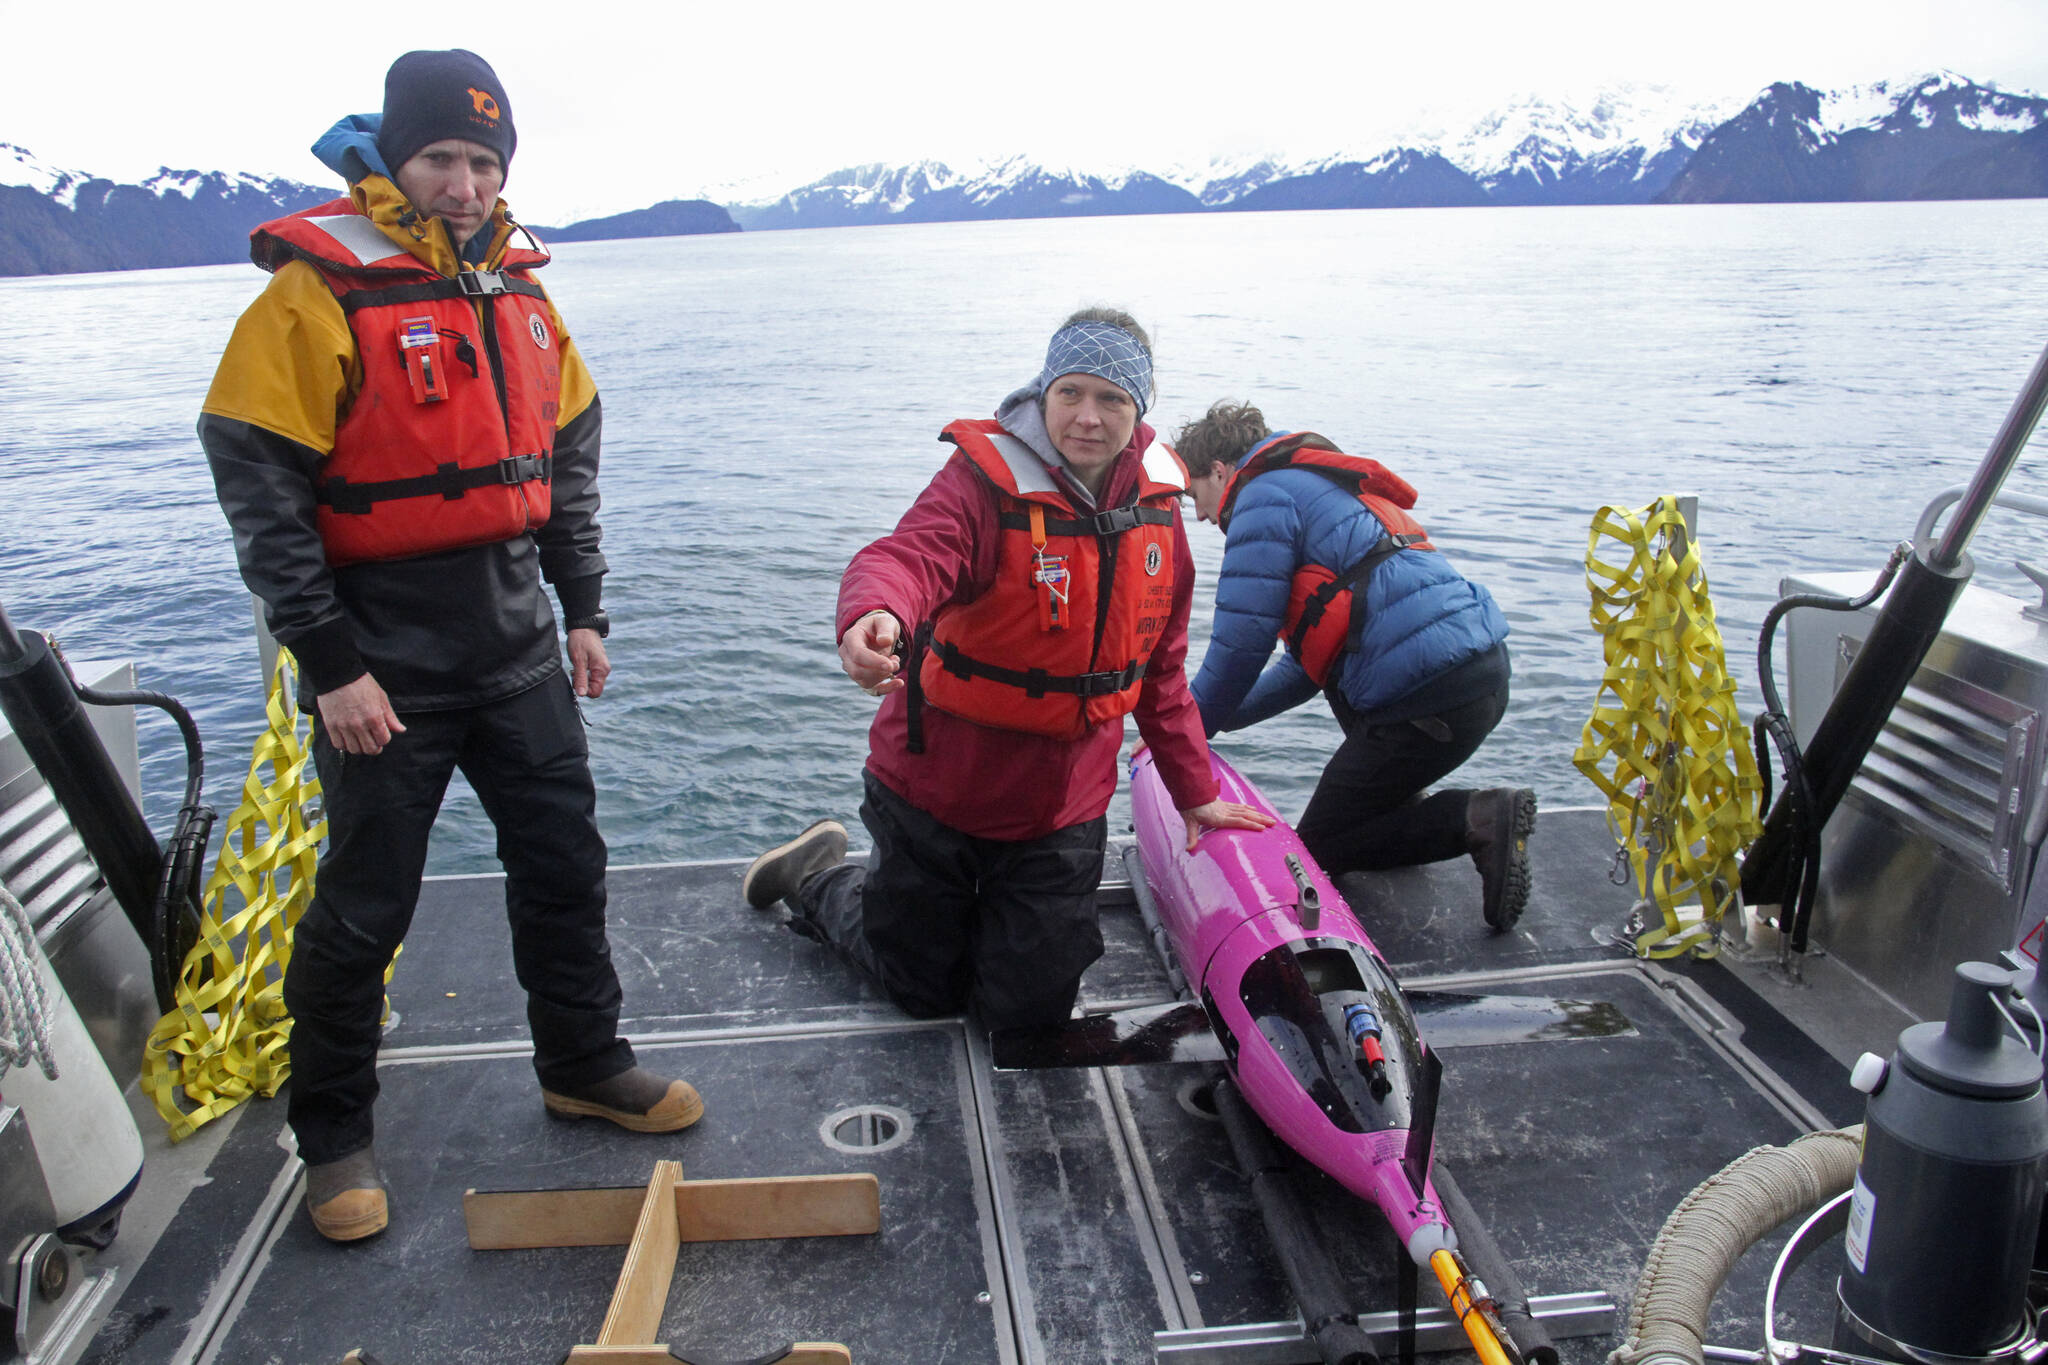 This May 4, 2022, photo shows oceanographers Andrew McDonnell, left, and Claudine Hauri, middle, along with engineer Joran Kemme after an underwater glider was pulled aboard the University of Alaska Fairbanks research vessel Nanuq from the Gulf of Alaska. The glider was fitted with special sensors to study ocean acidification. (AP Photo / Mark Thiessen)